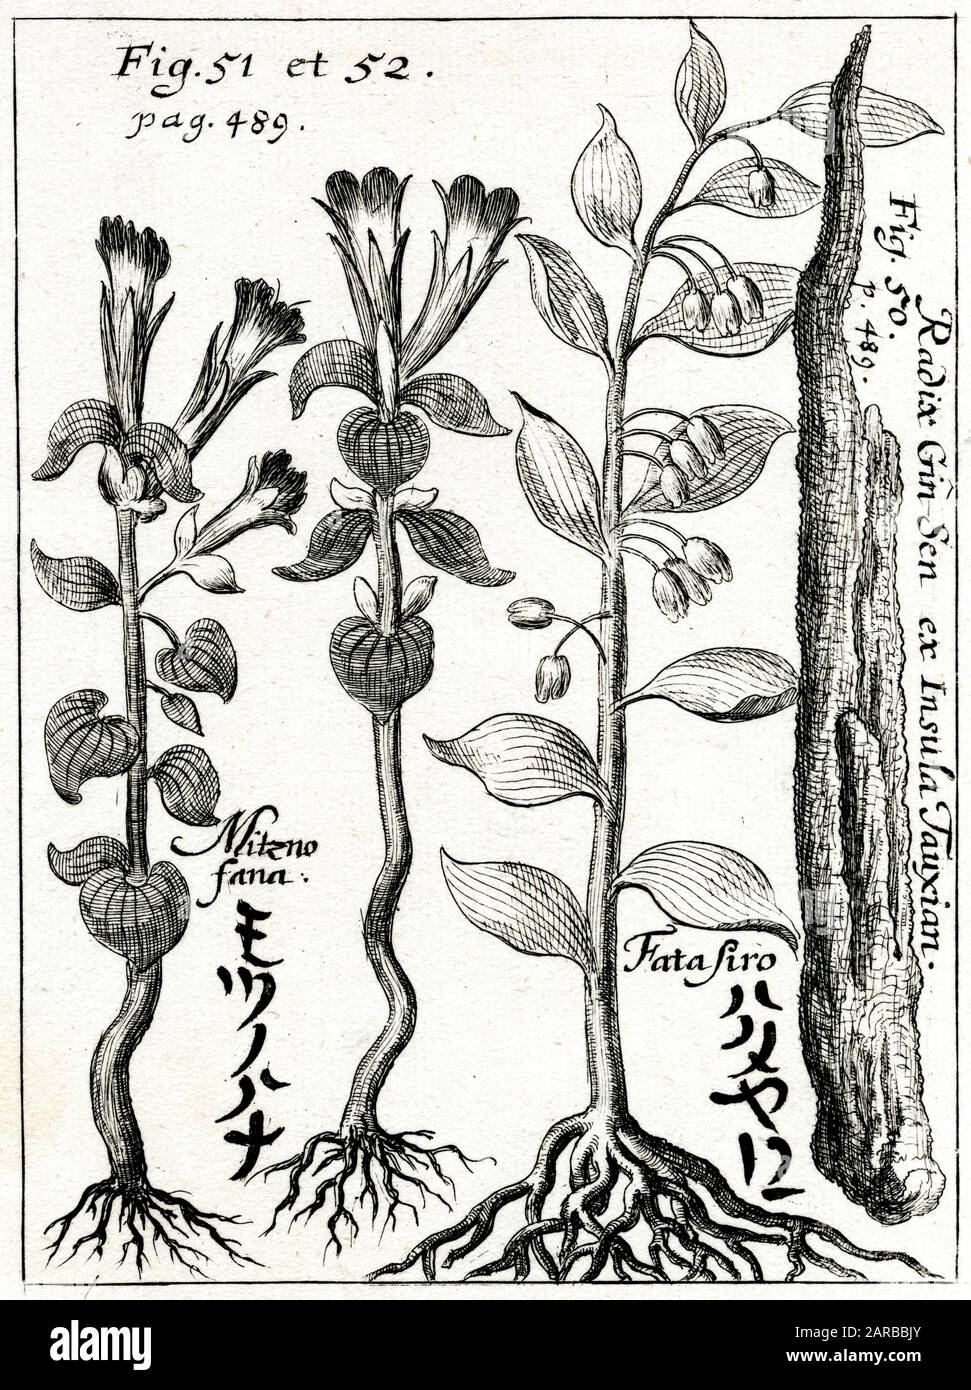 Panax Ginseng or Ginseng root (on right) and other plants.     Date: 1690 Stock Photo